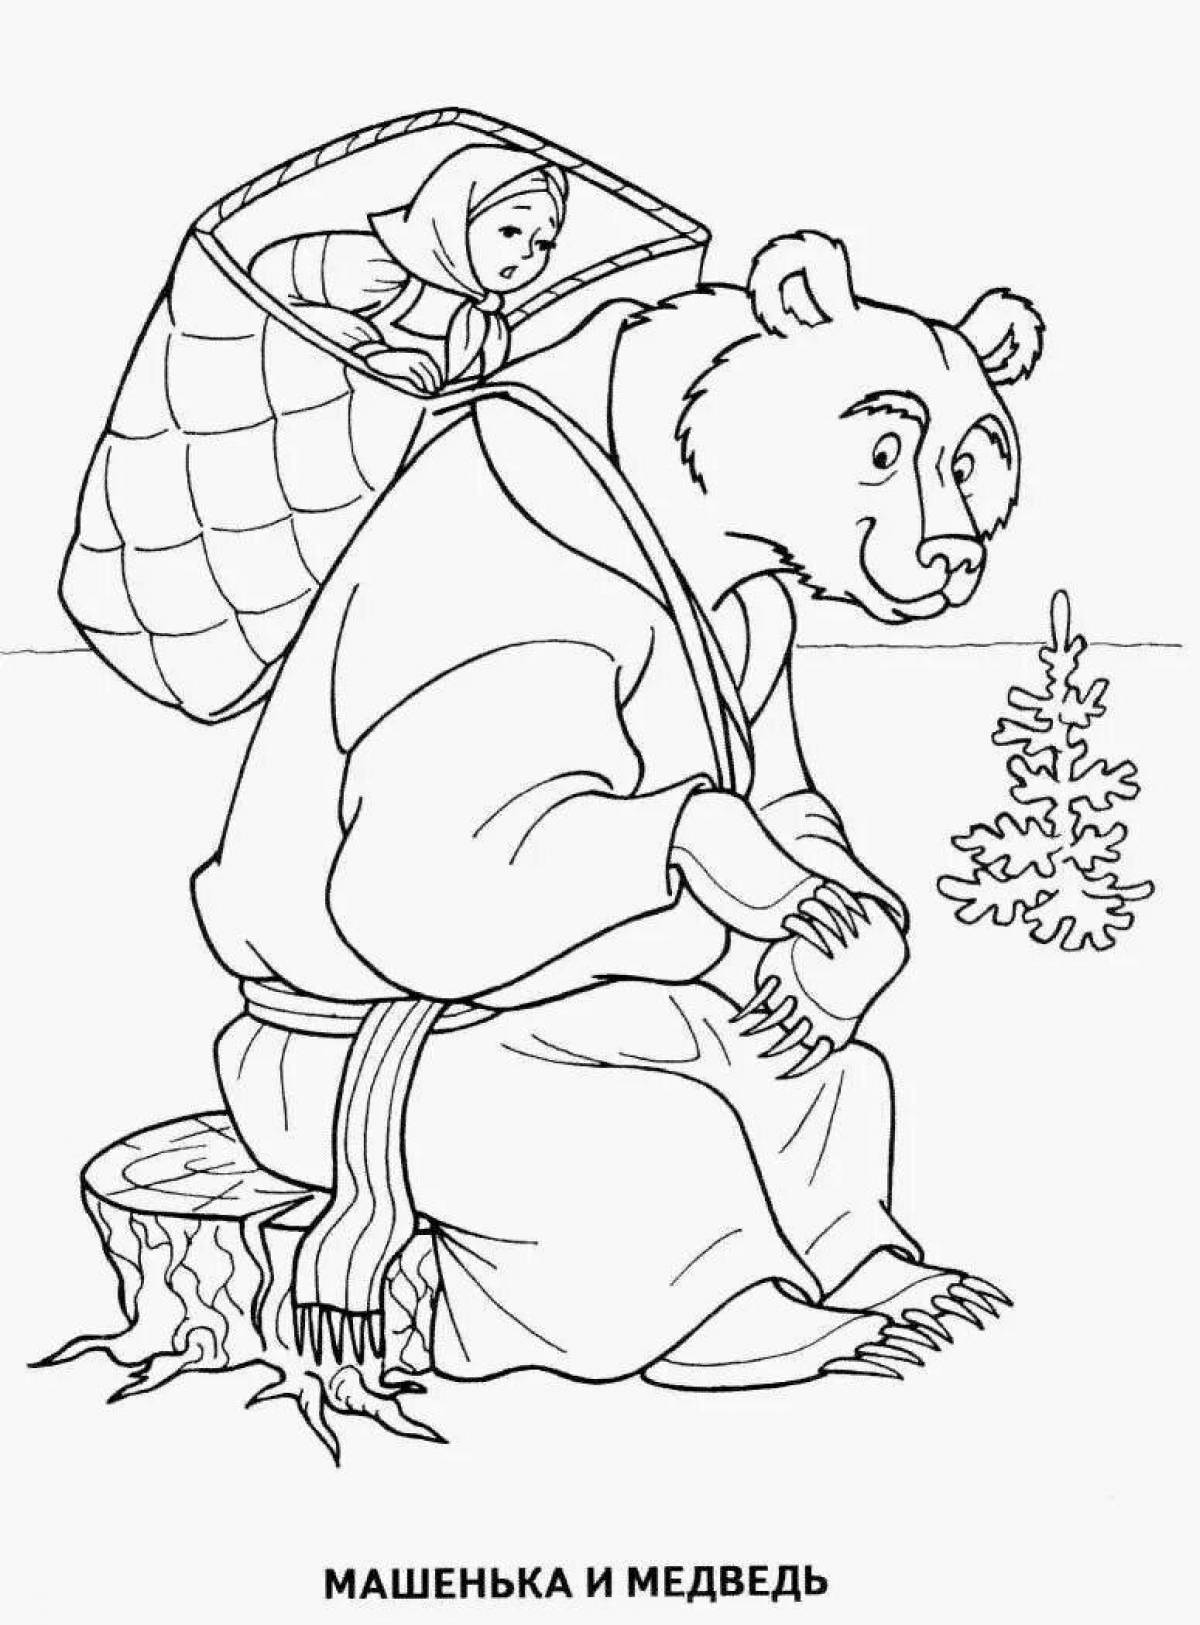 Delightful coloring book with characters from Russian fairy tales